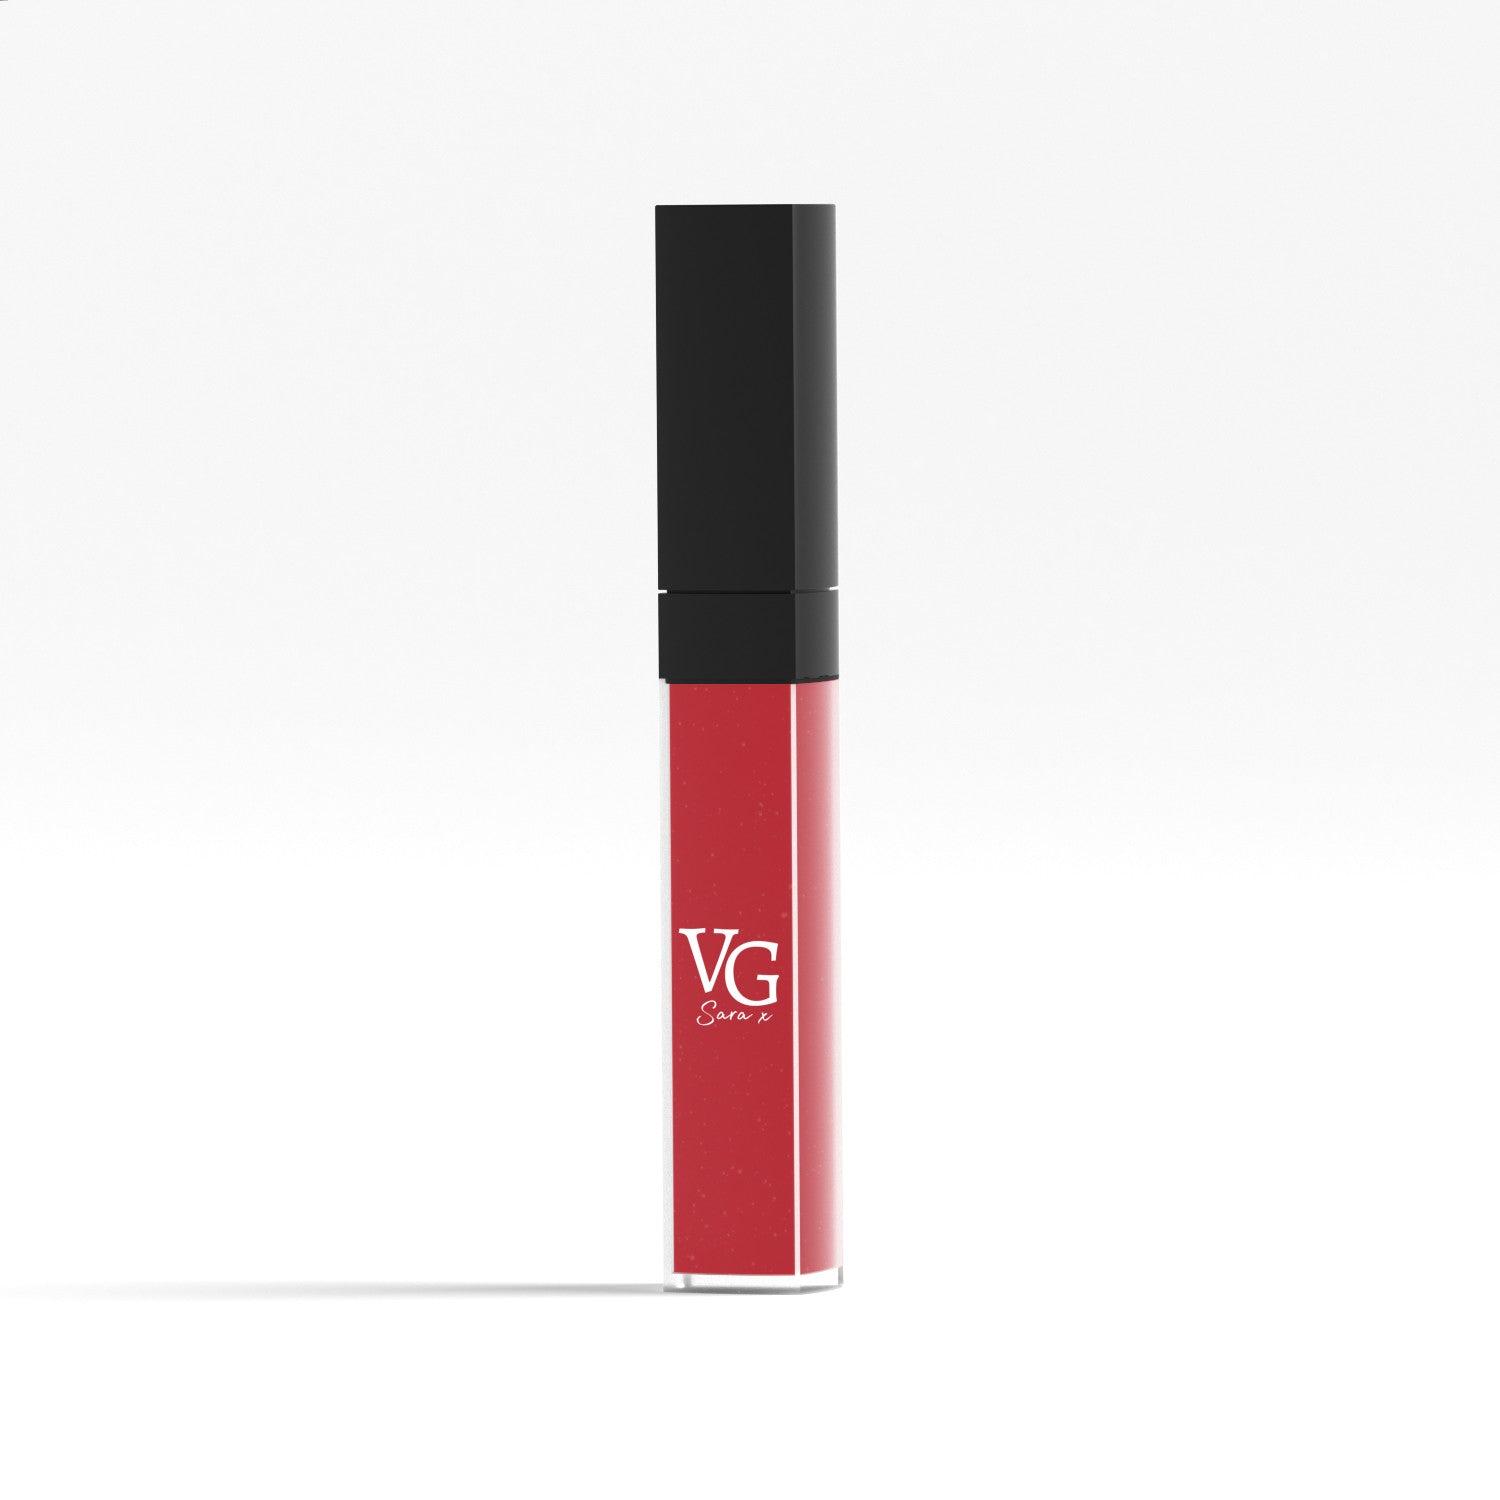 Close view of a vegan lipstick with the VG logo etched on the cap